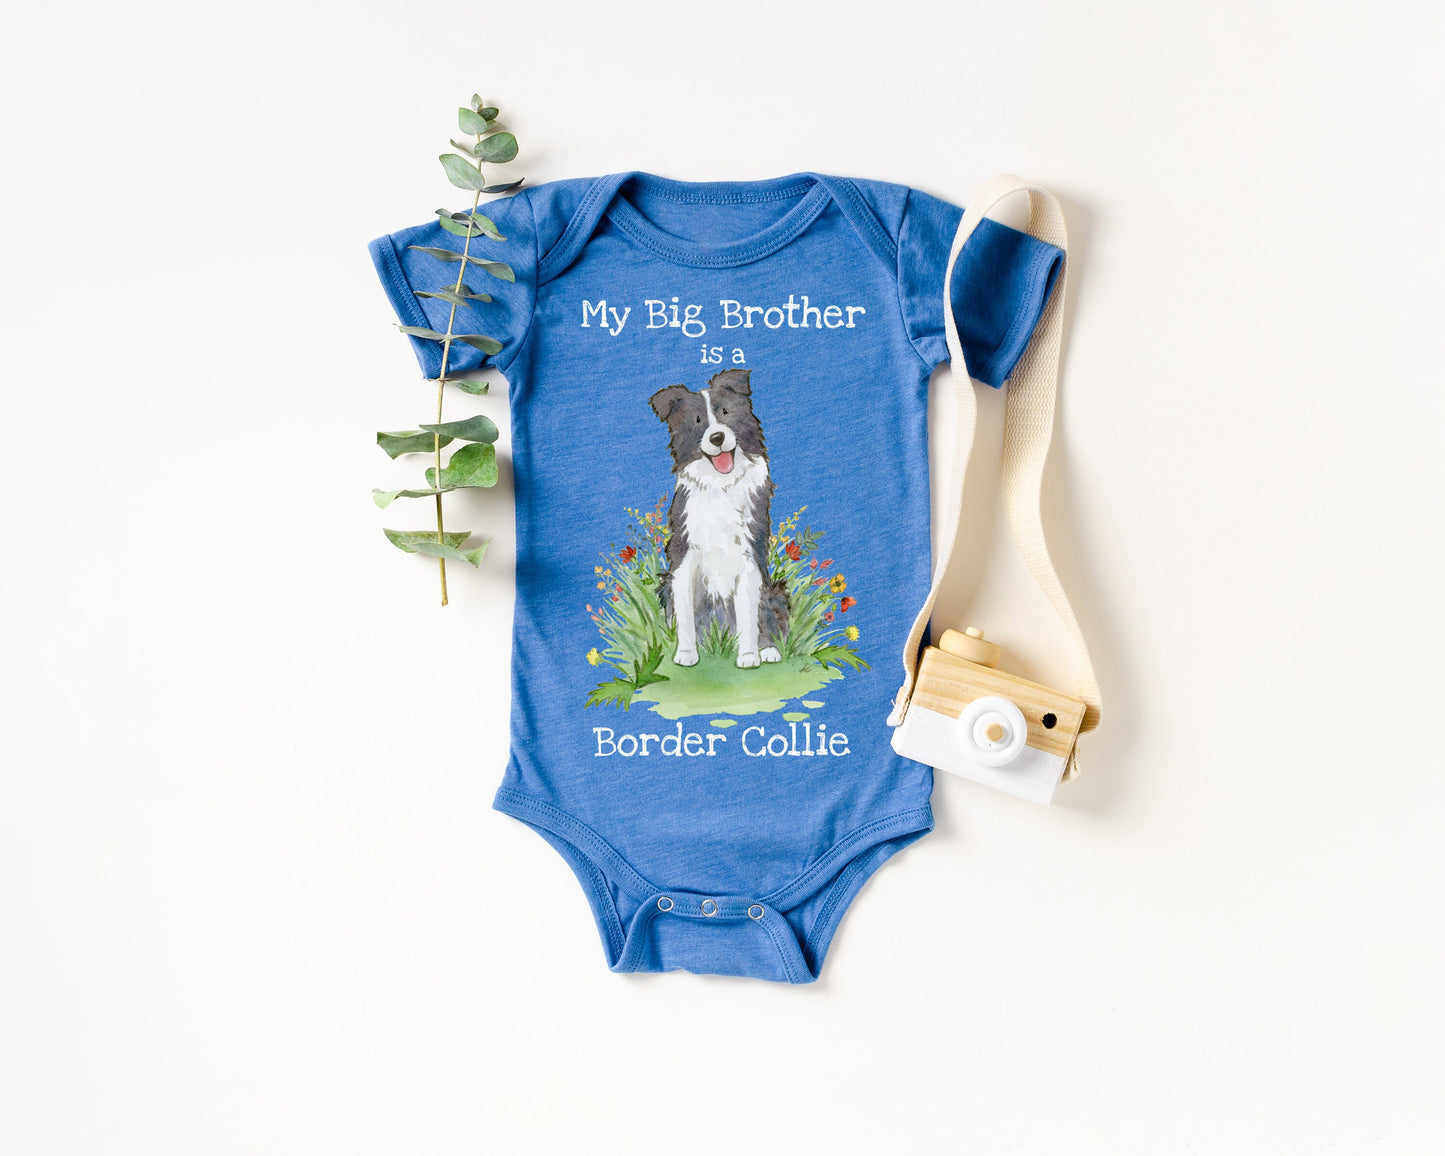 Baby bodysuit with a black and white border collie picture and &quot;My big brother is a border collie&quot; printed on it.